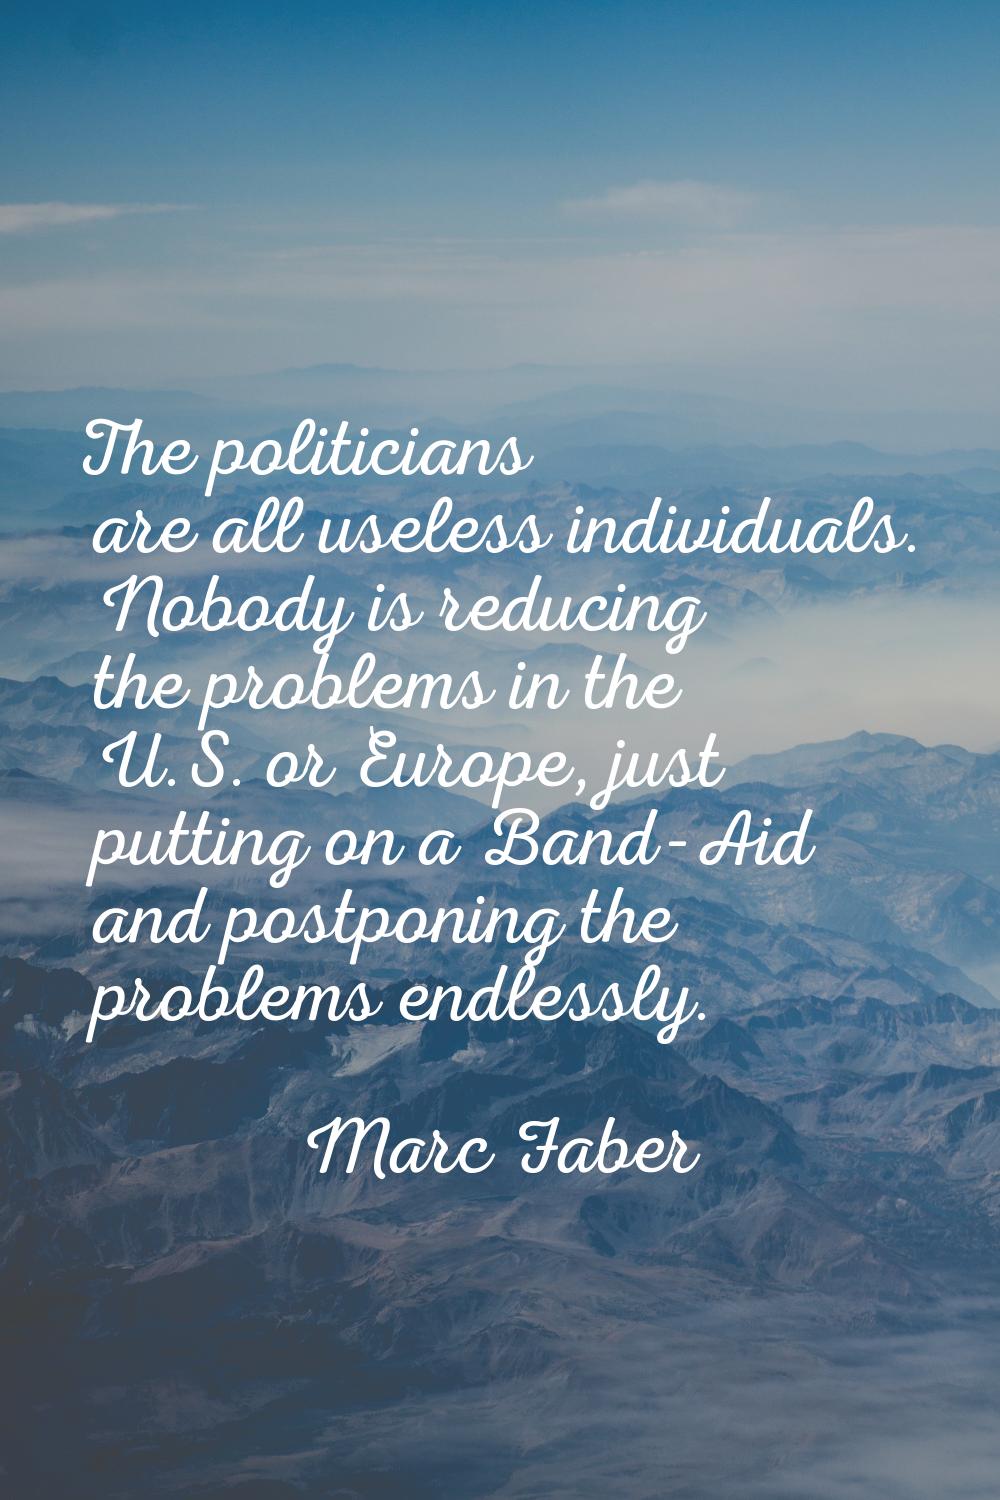 The politicians are all useless individuals. Nobody is reducing the problems in the U.S. or Europe,